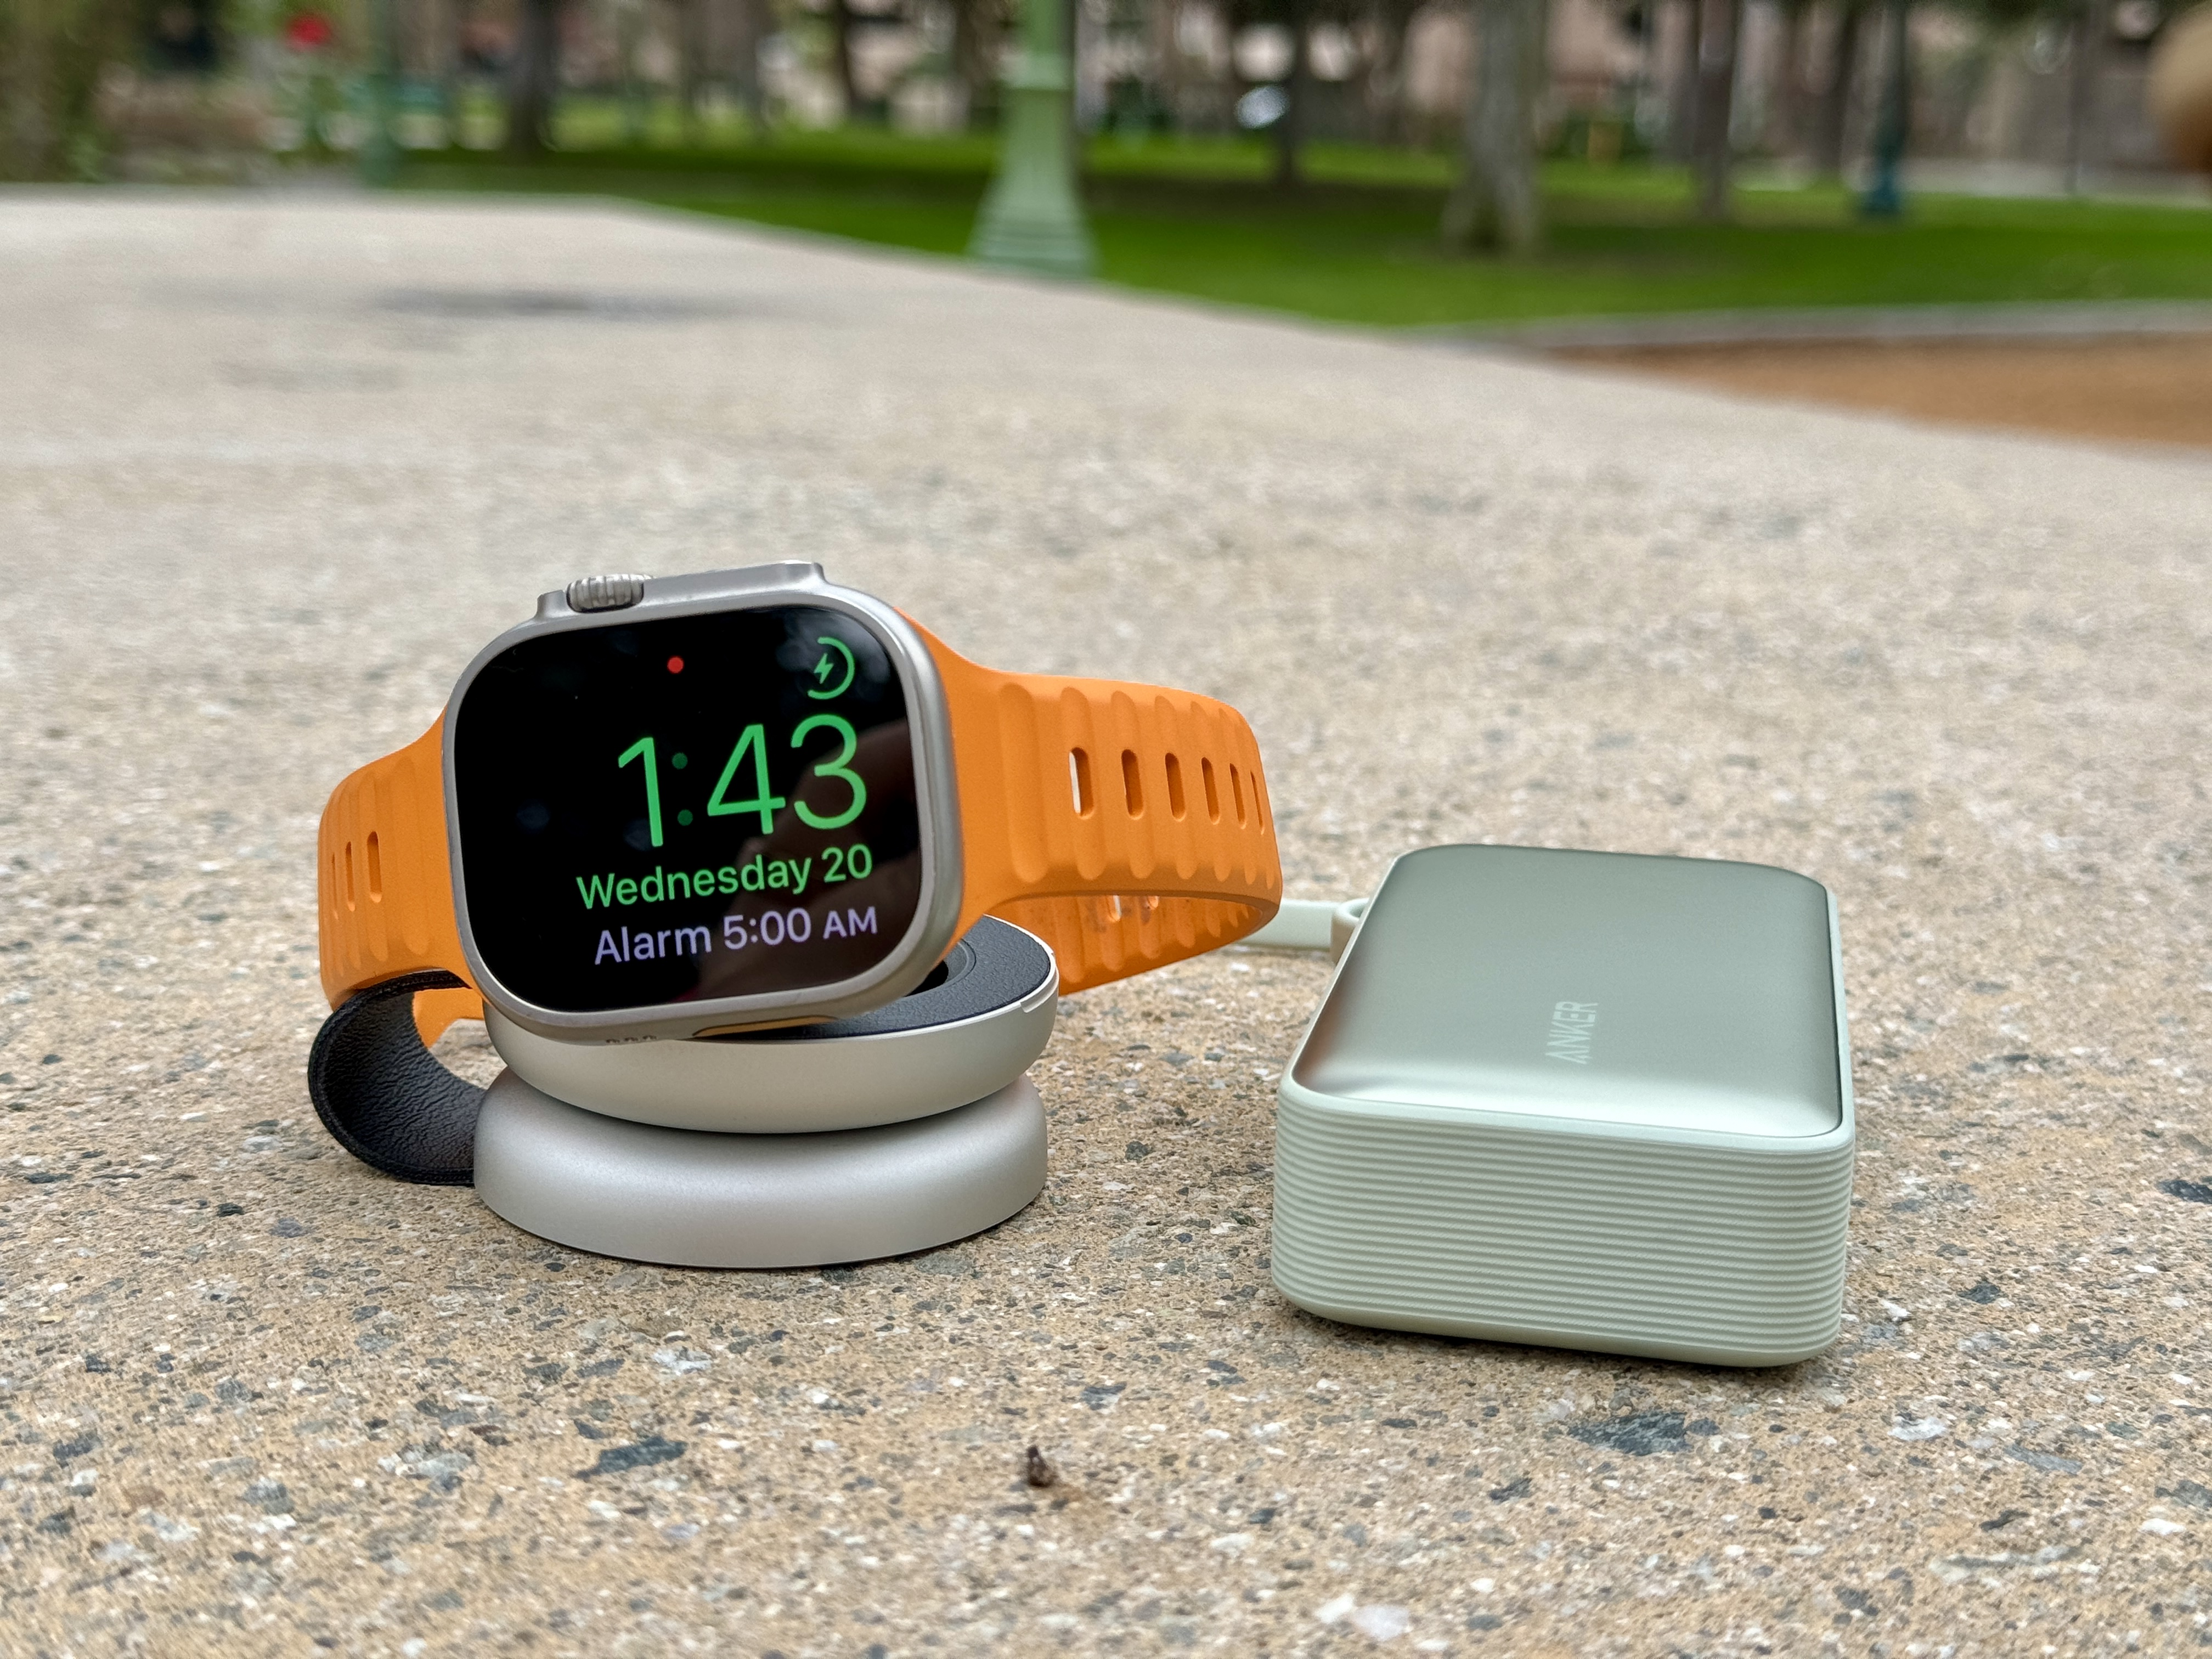 Huawei Watch Fit Wants To Convert Apple Watch And Fitbit Fans